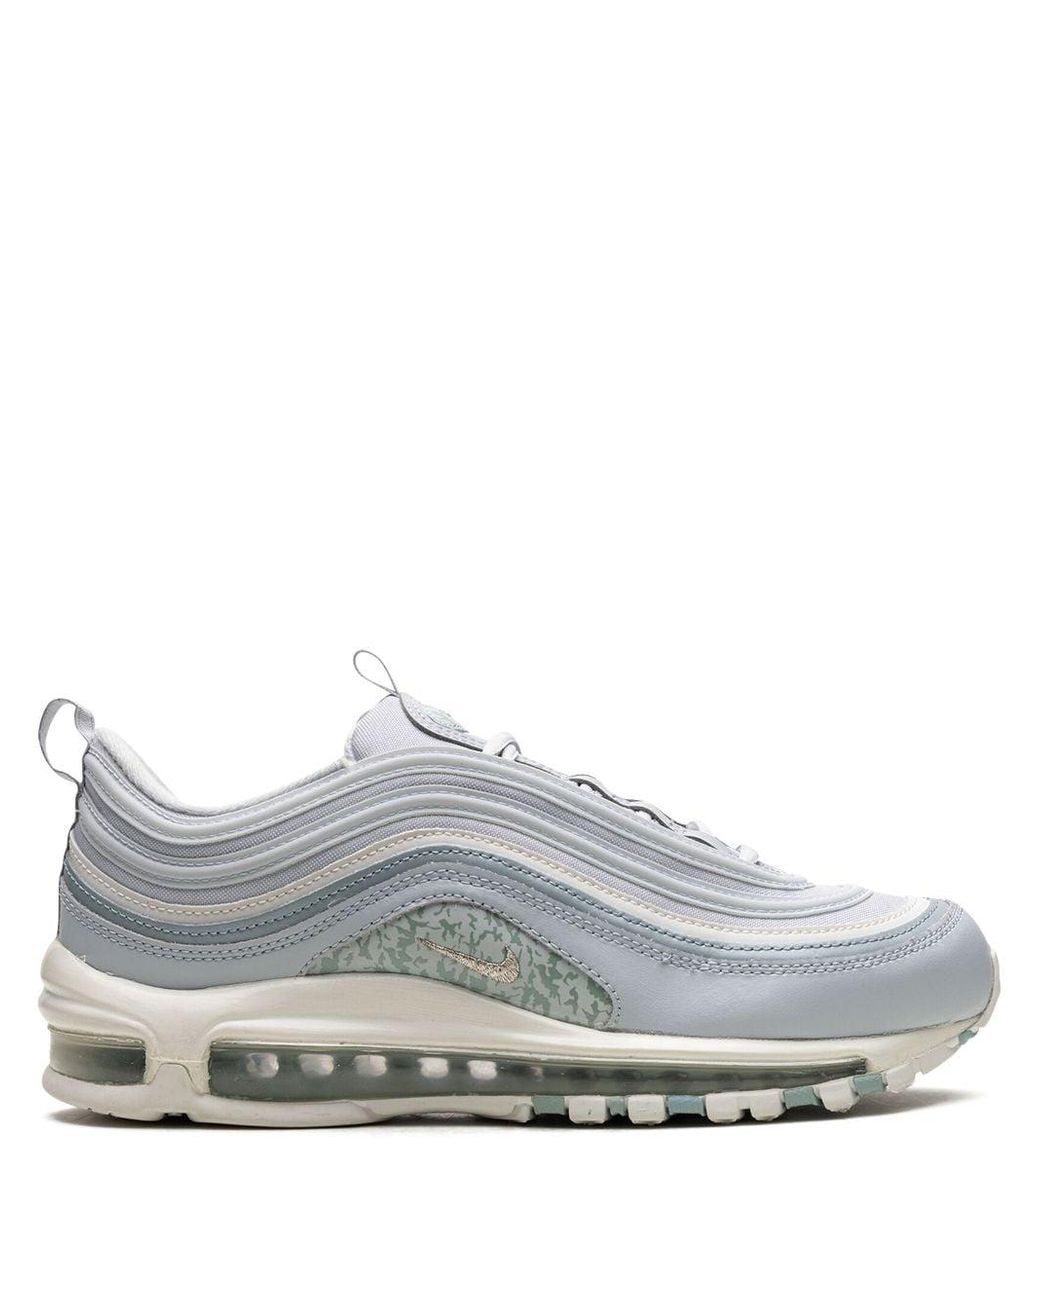 Nike Air Max 97 "aura Reflective Camo" Sneakers in Gray | Lyst